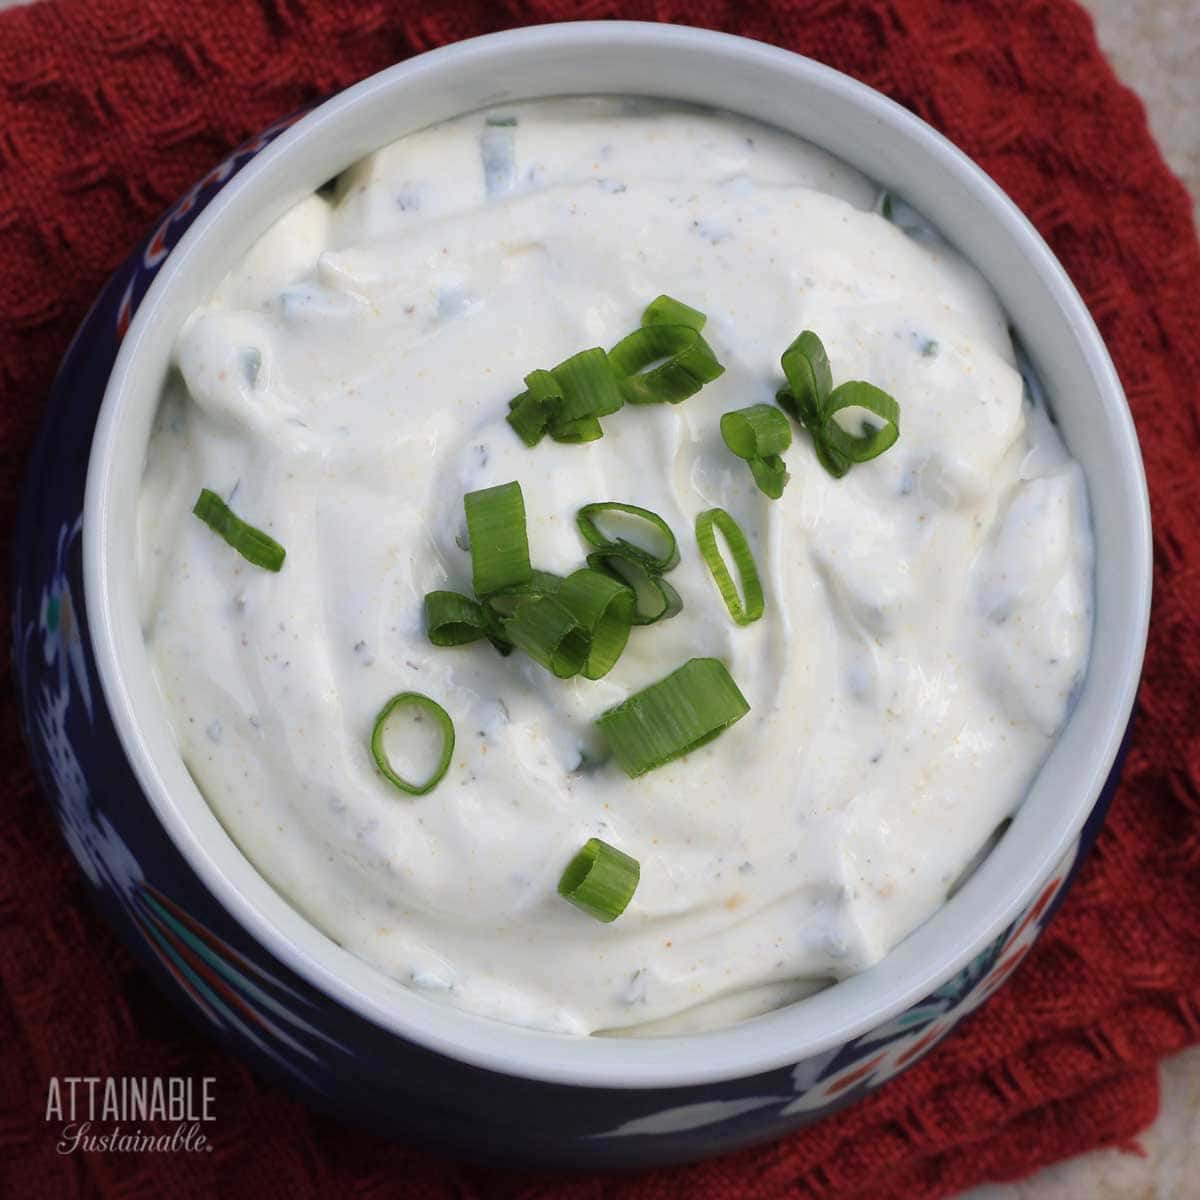 https://www.attainable-sustainable.net/wp-content/uploads/2020/07/green-onion-dip.jpg